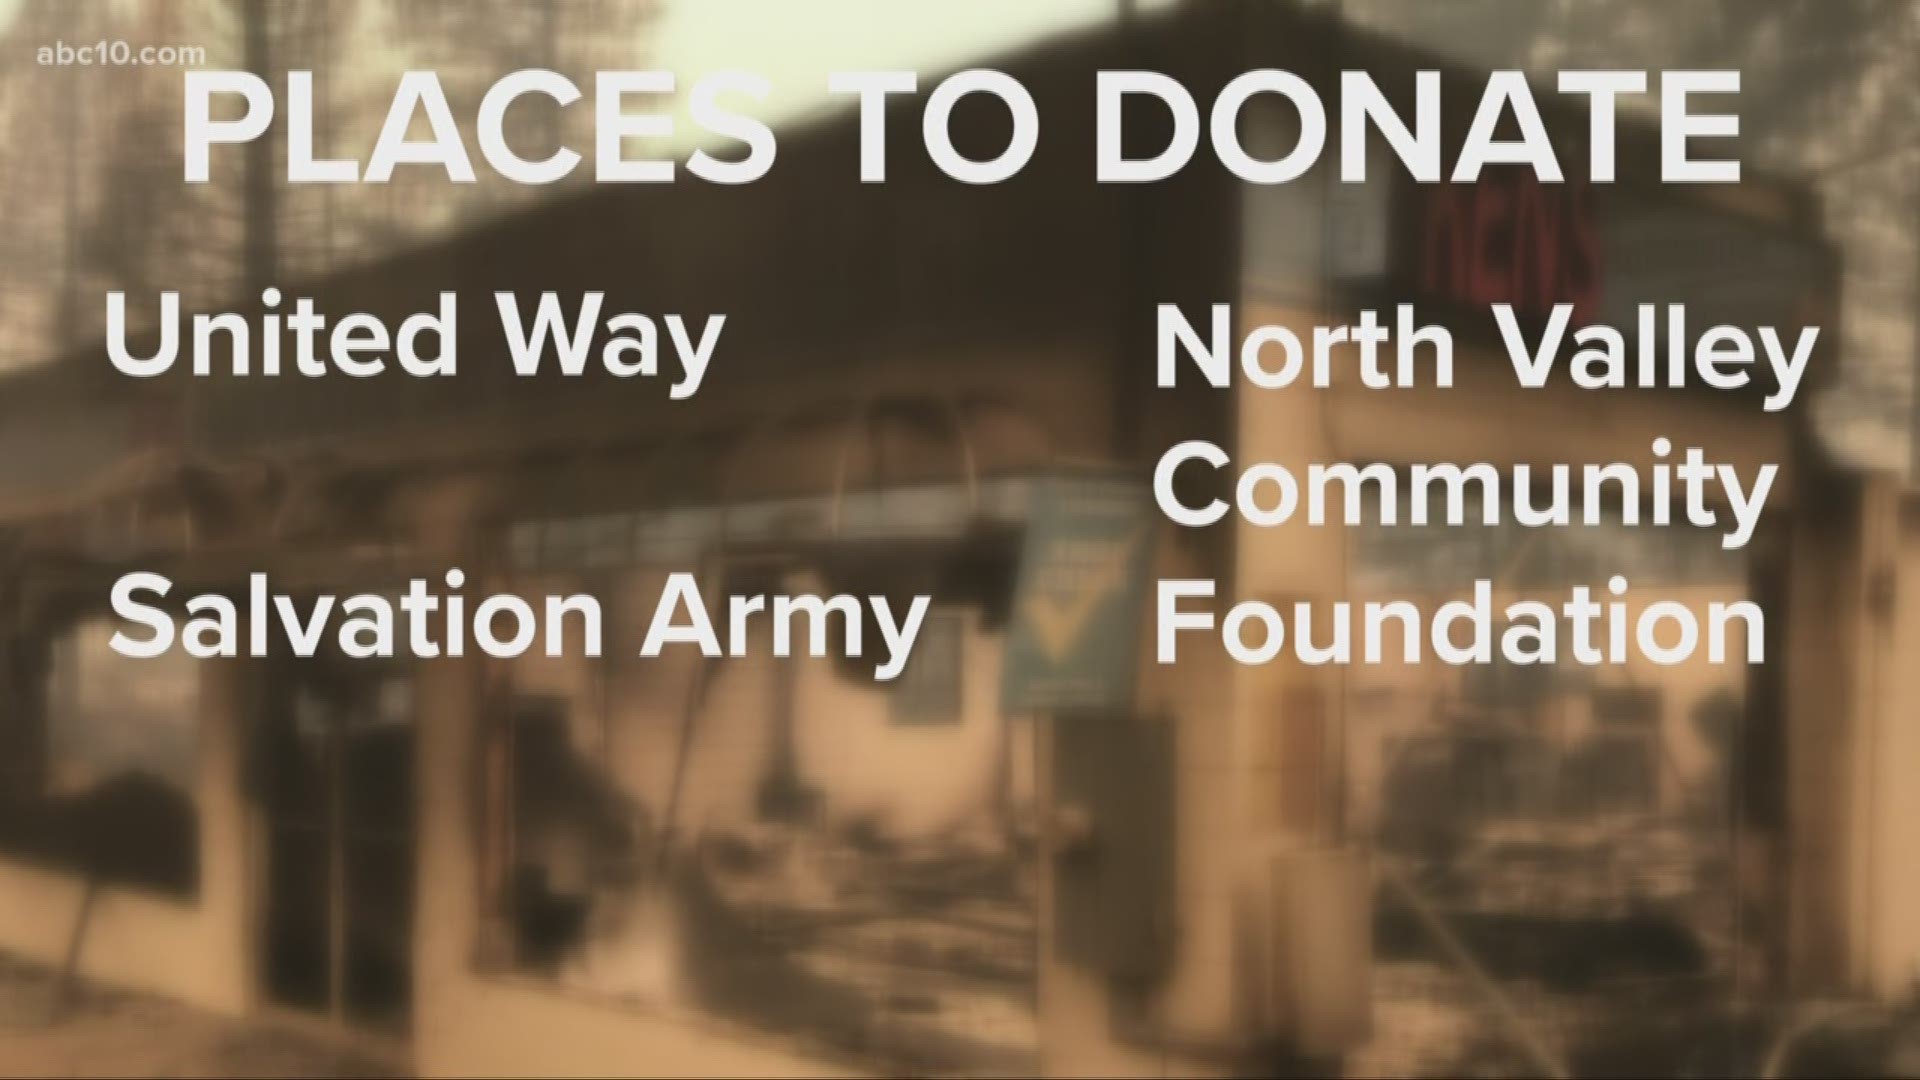 Many organizations are accepting money donations to both stop the fire and help the victims.